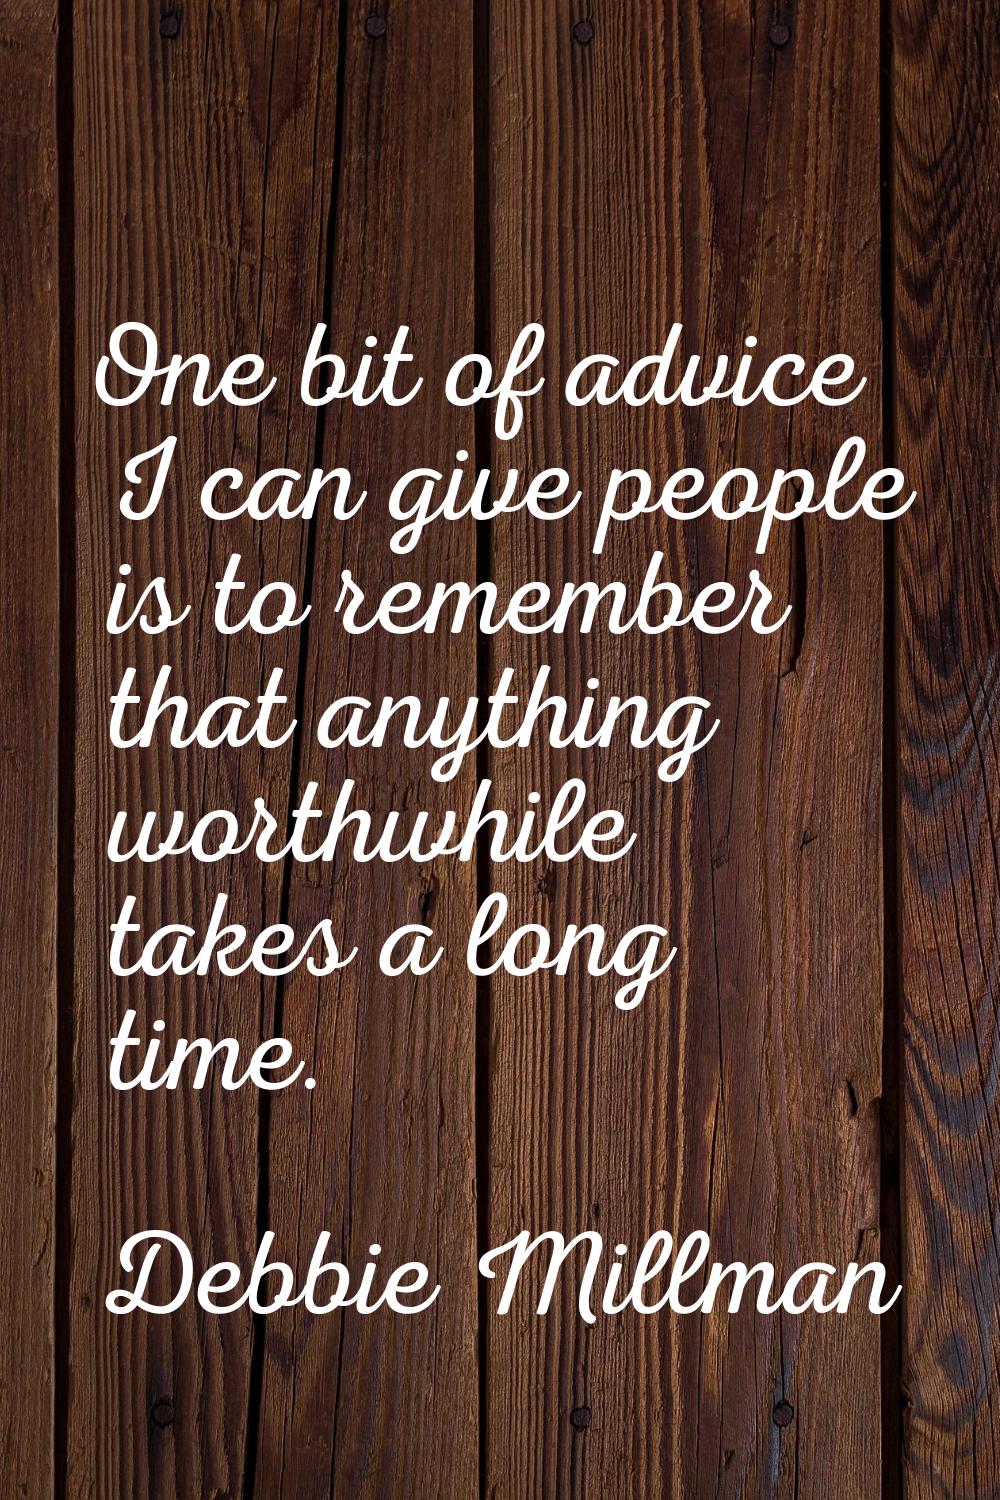 One bit of advice I can give people is to remember that anything worthwhile takes a long time.